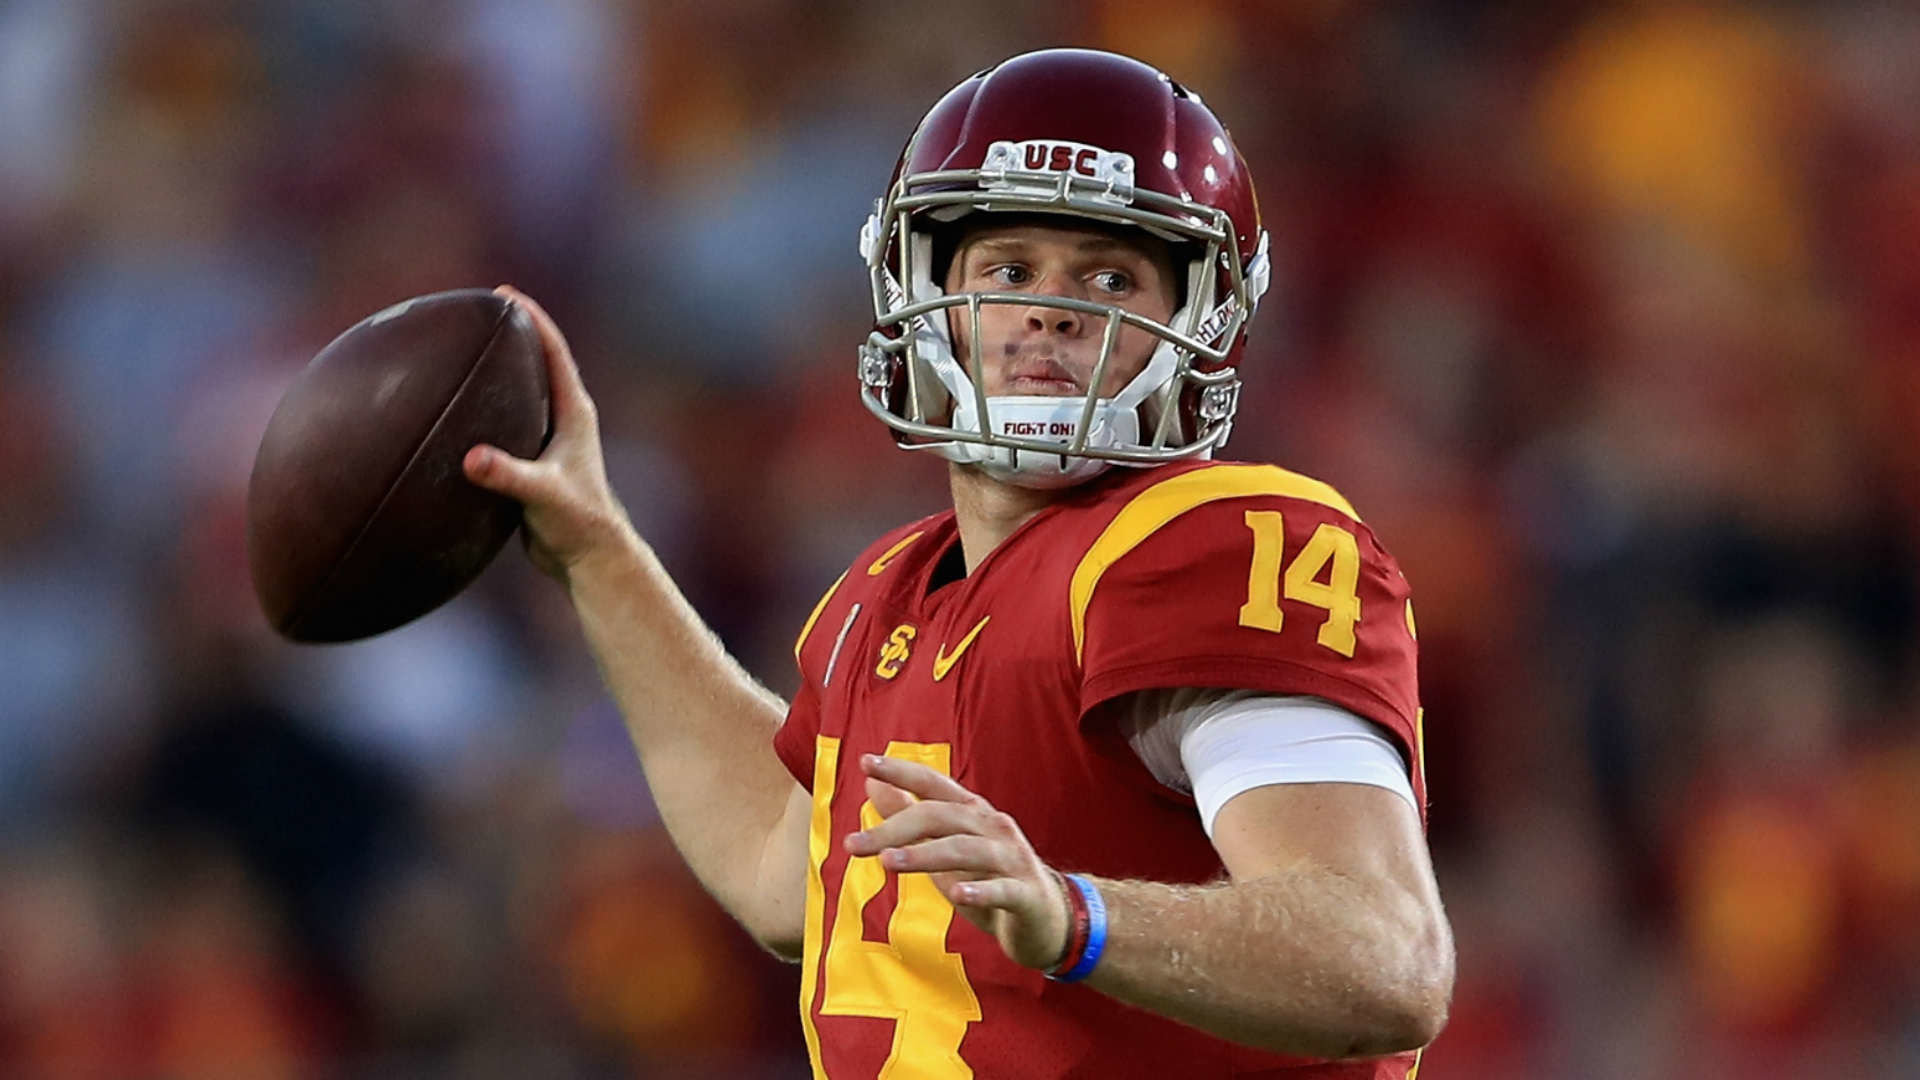 1920x1080 Sam Darnold may return to USC if Browns have No. 1 pick in 2018 draft | NFL  | Sporting News